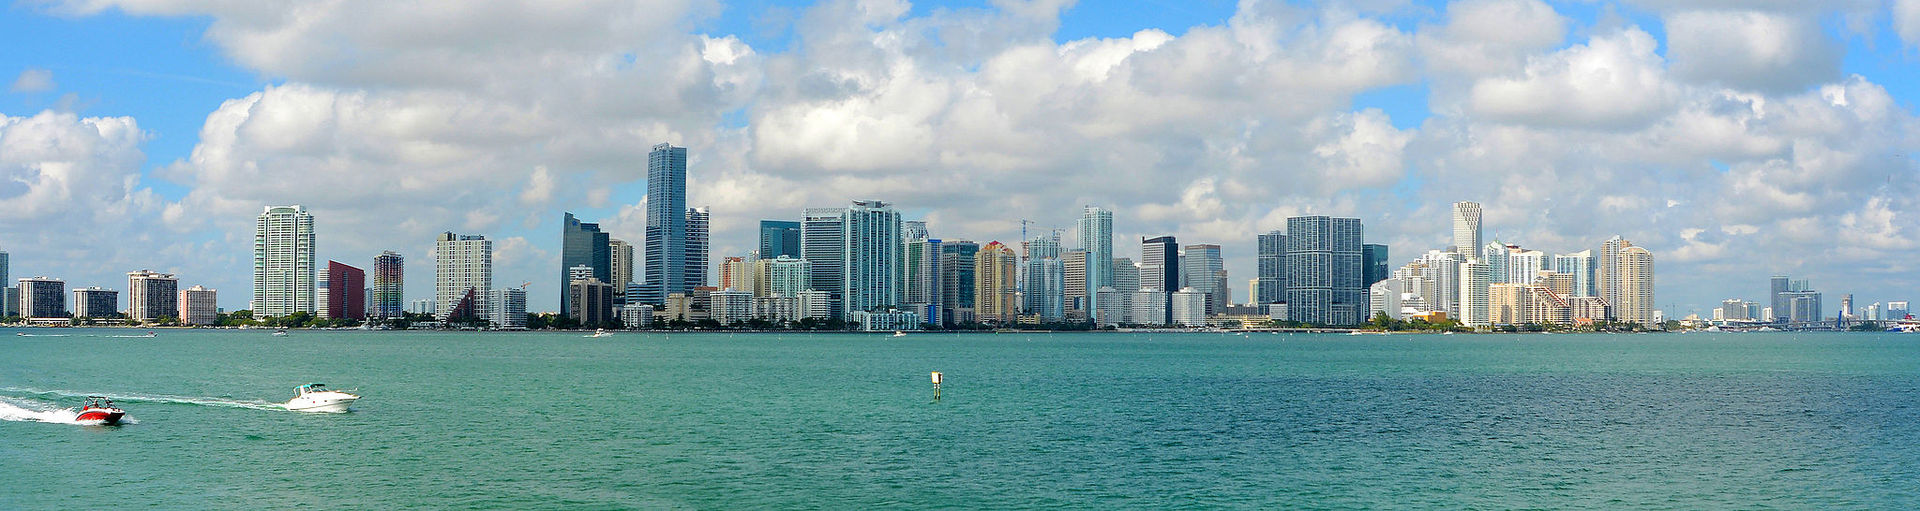 Downtown_Miami_Panorama_from_the_Rusty_Pelican_photo_D_Ramey_Logan